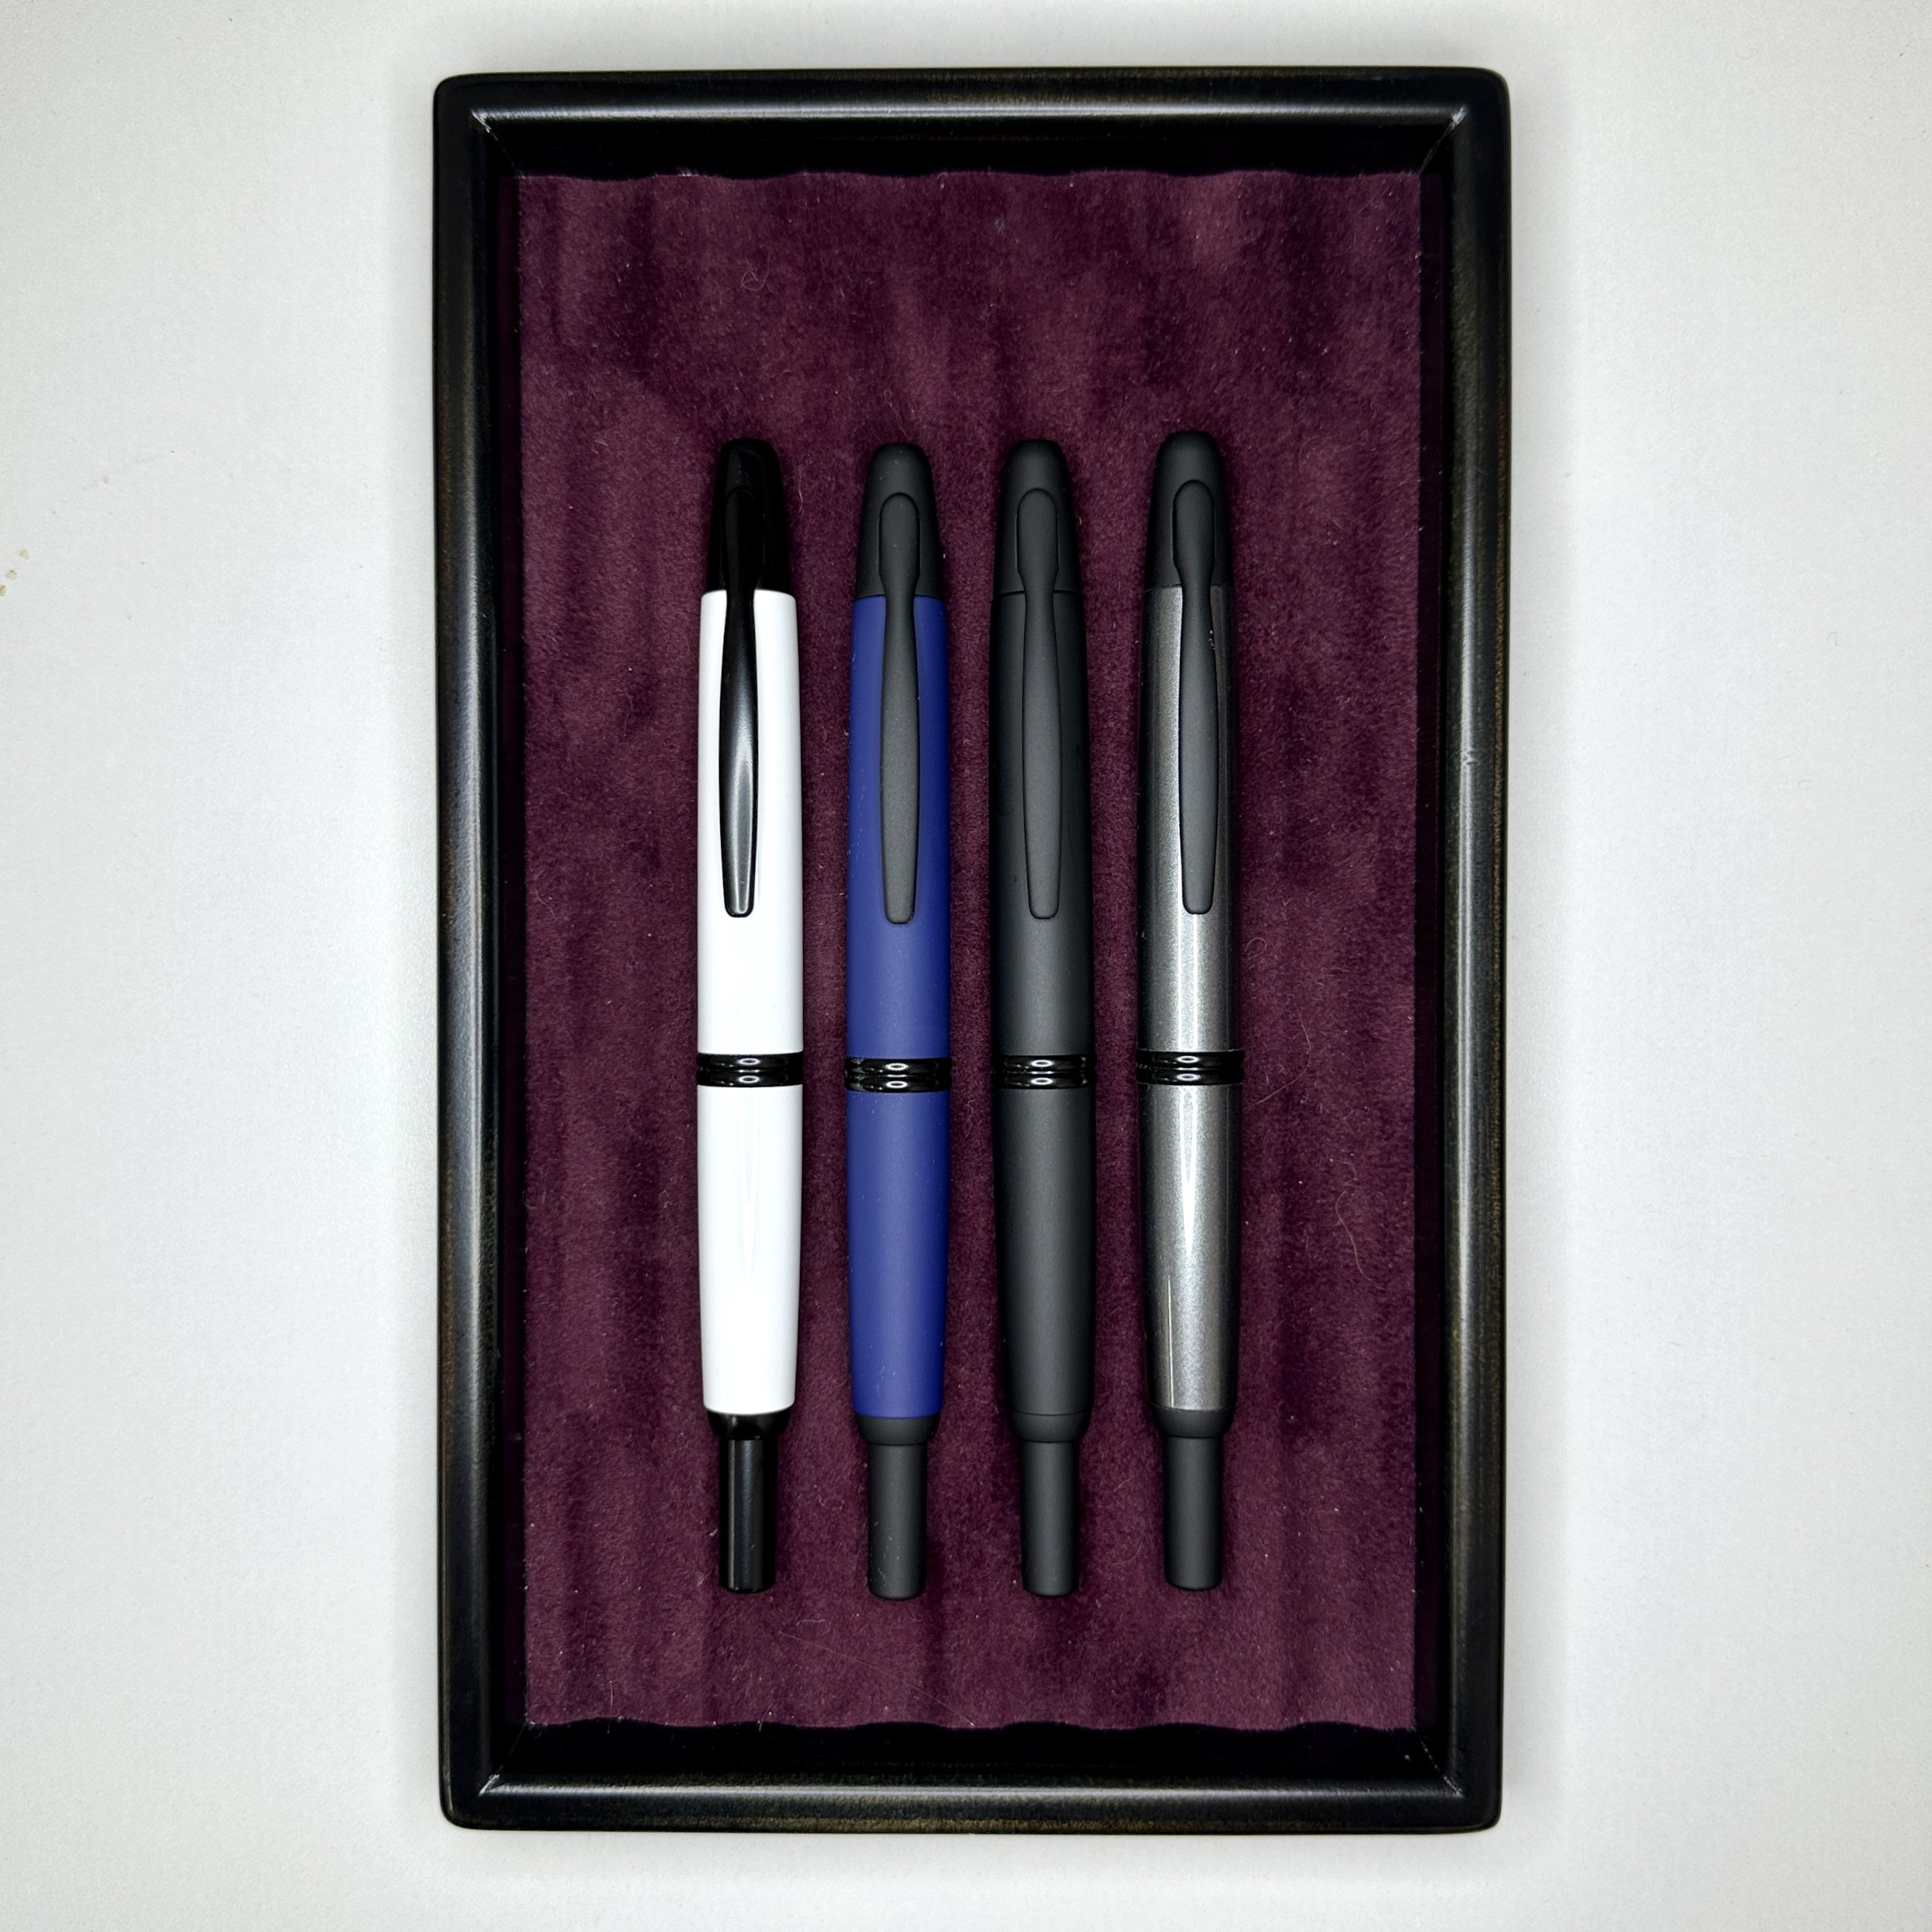 INKredible Fountain Pen Bundle!, Scribble & sketch with passion!